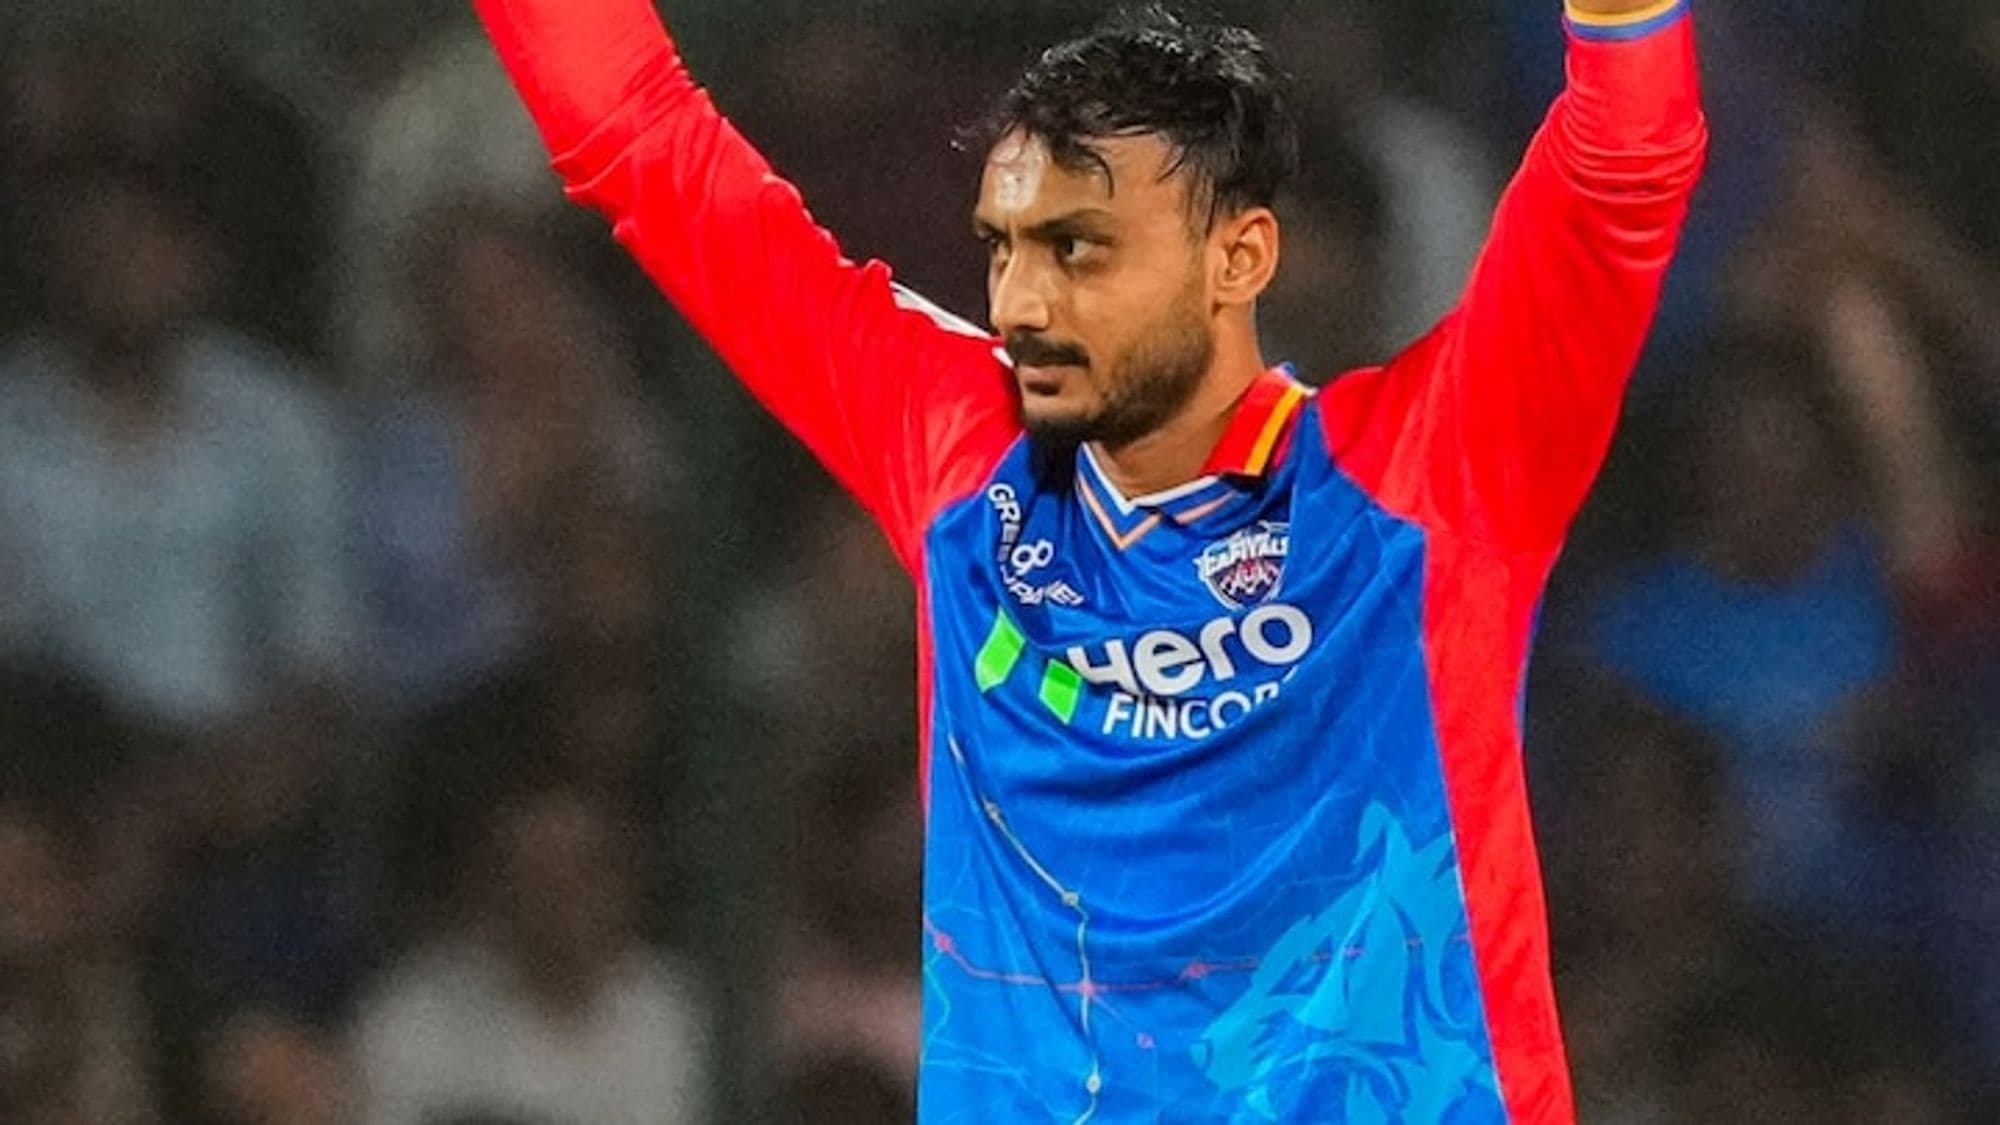 # Title: Axar Patel's Controversial Remark Sparks Outrage After IPL Victory